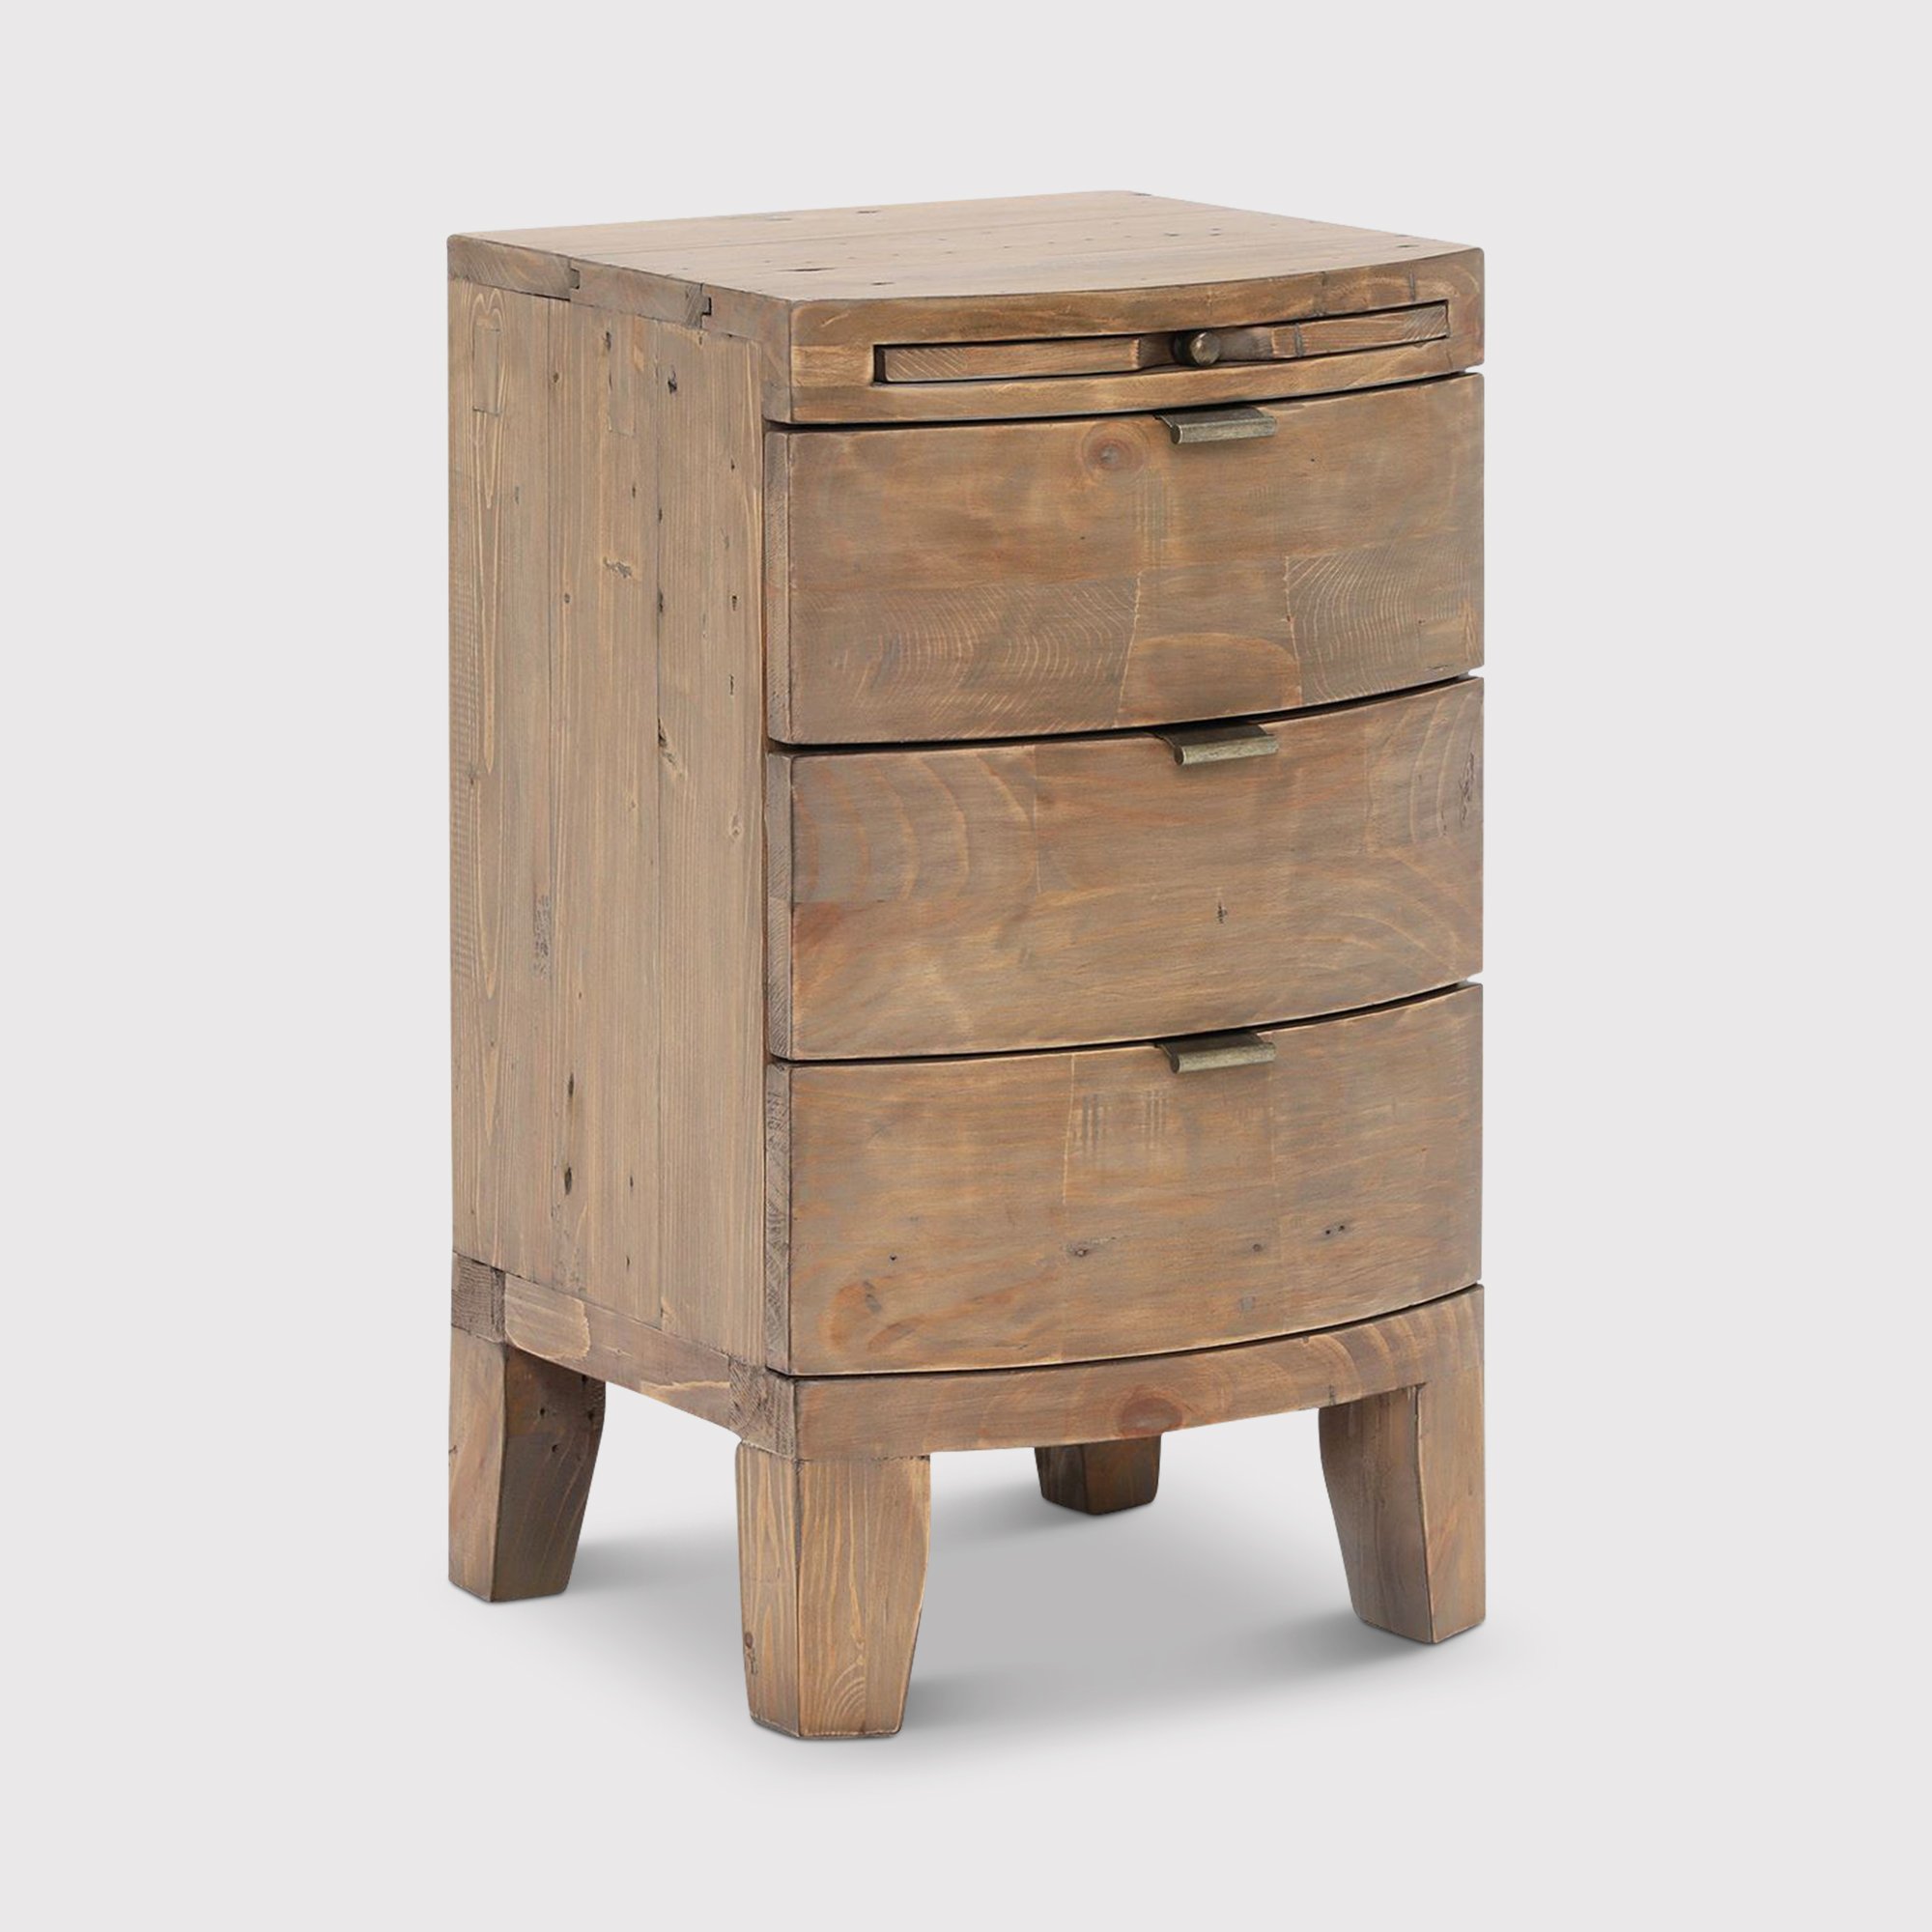 Rye 3 Drawer Bow Front Bedside Table, Neutral | Barker & Stonehouse